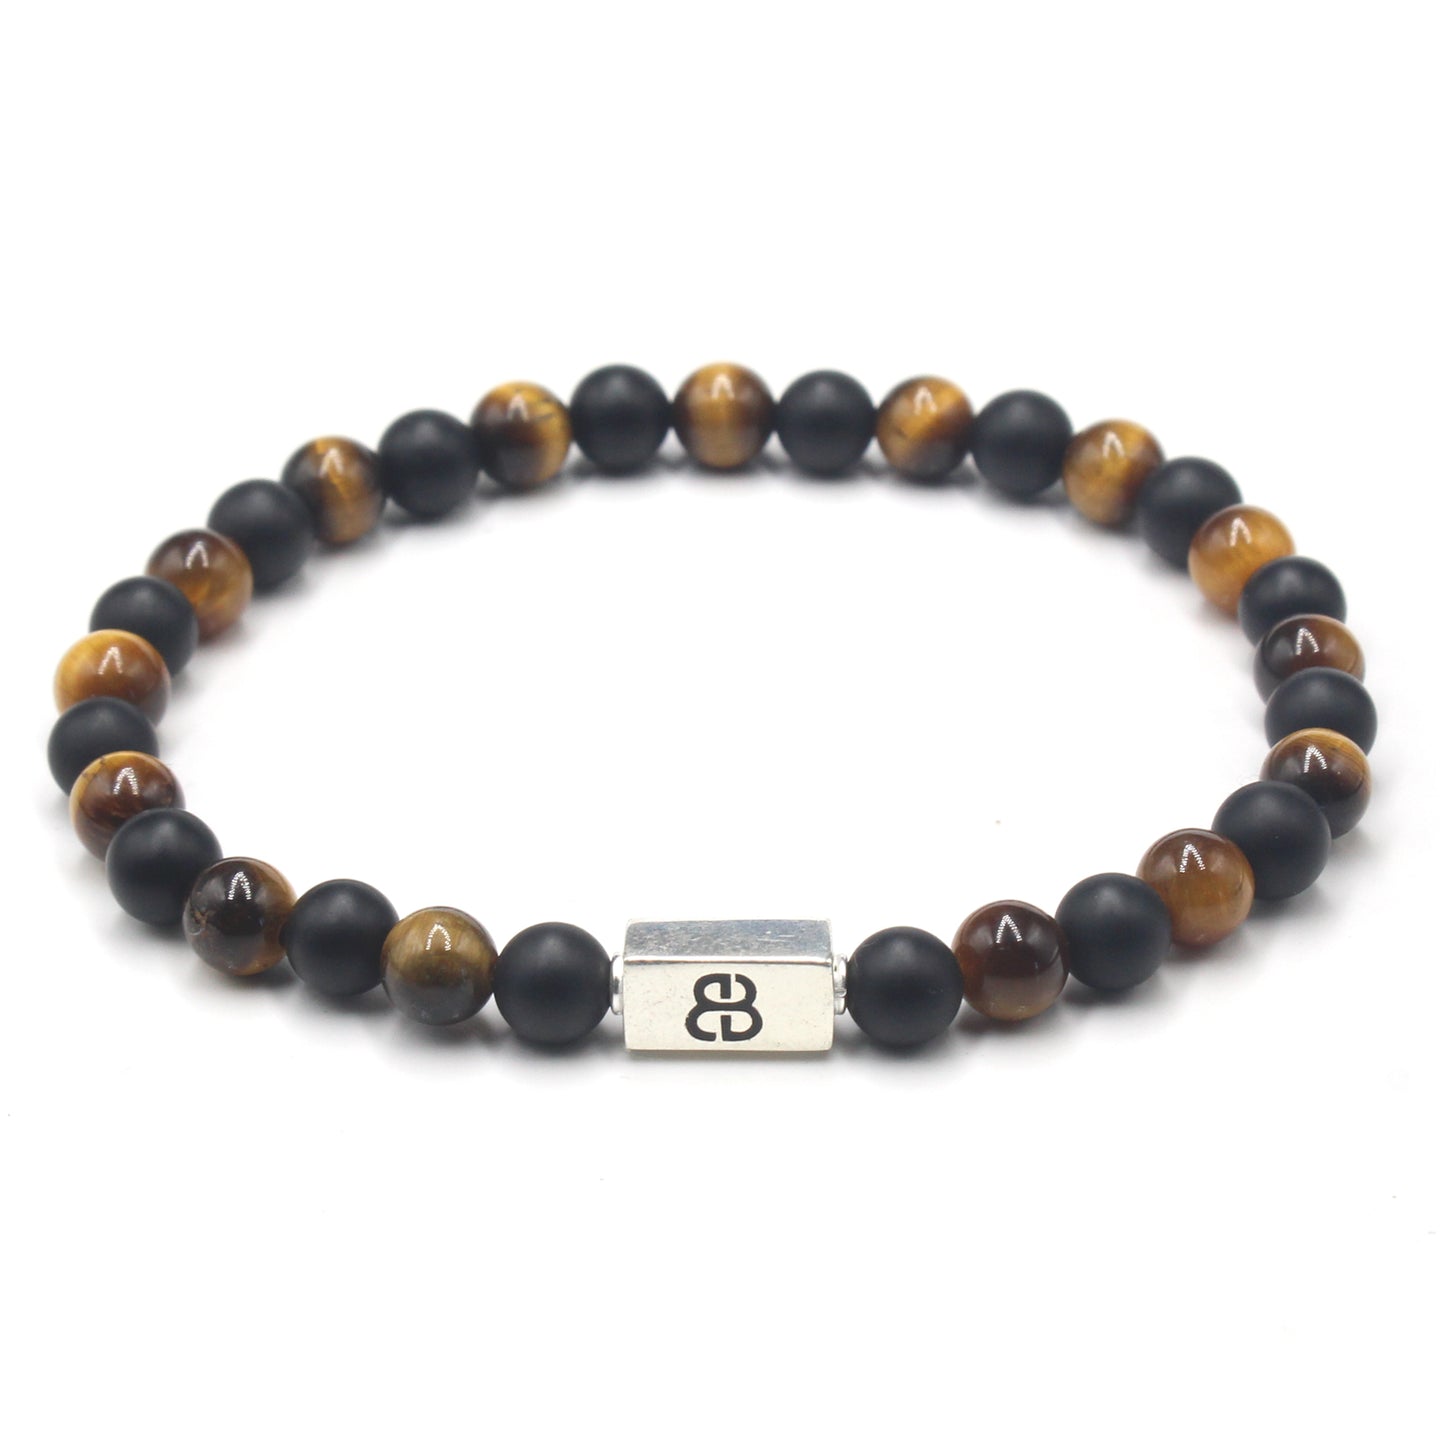 Tiger's Eye and Matte Onyx